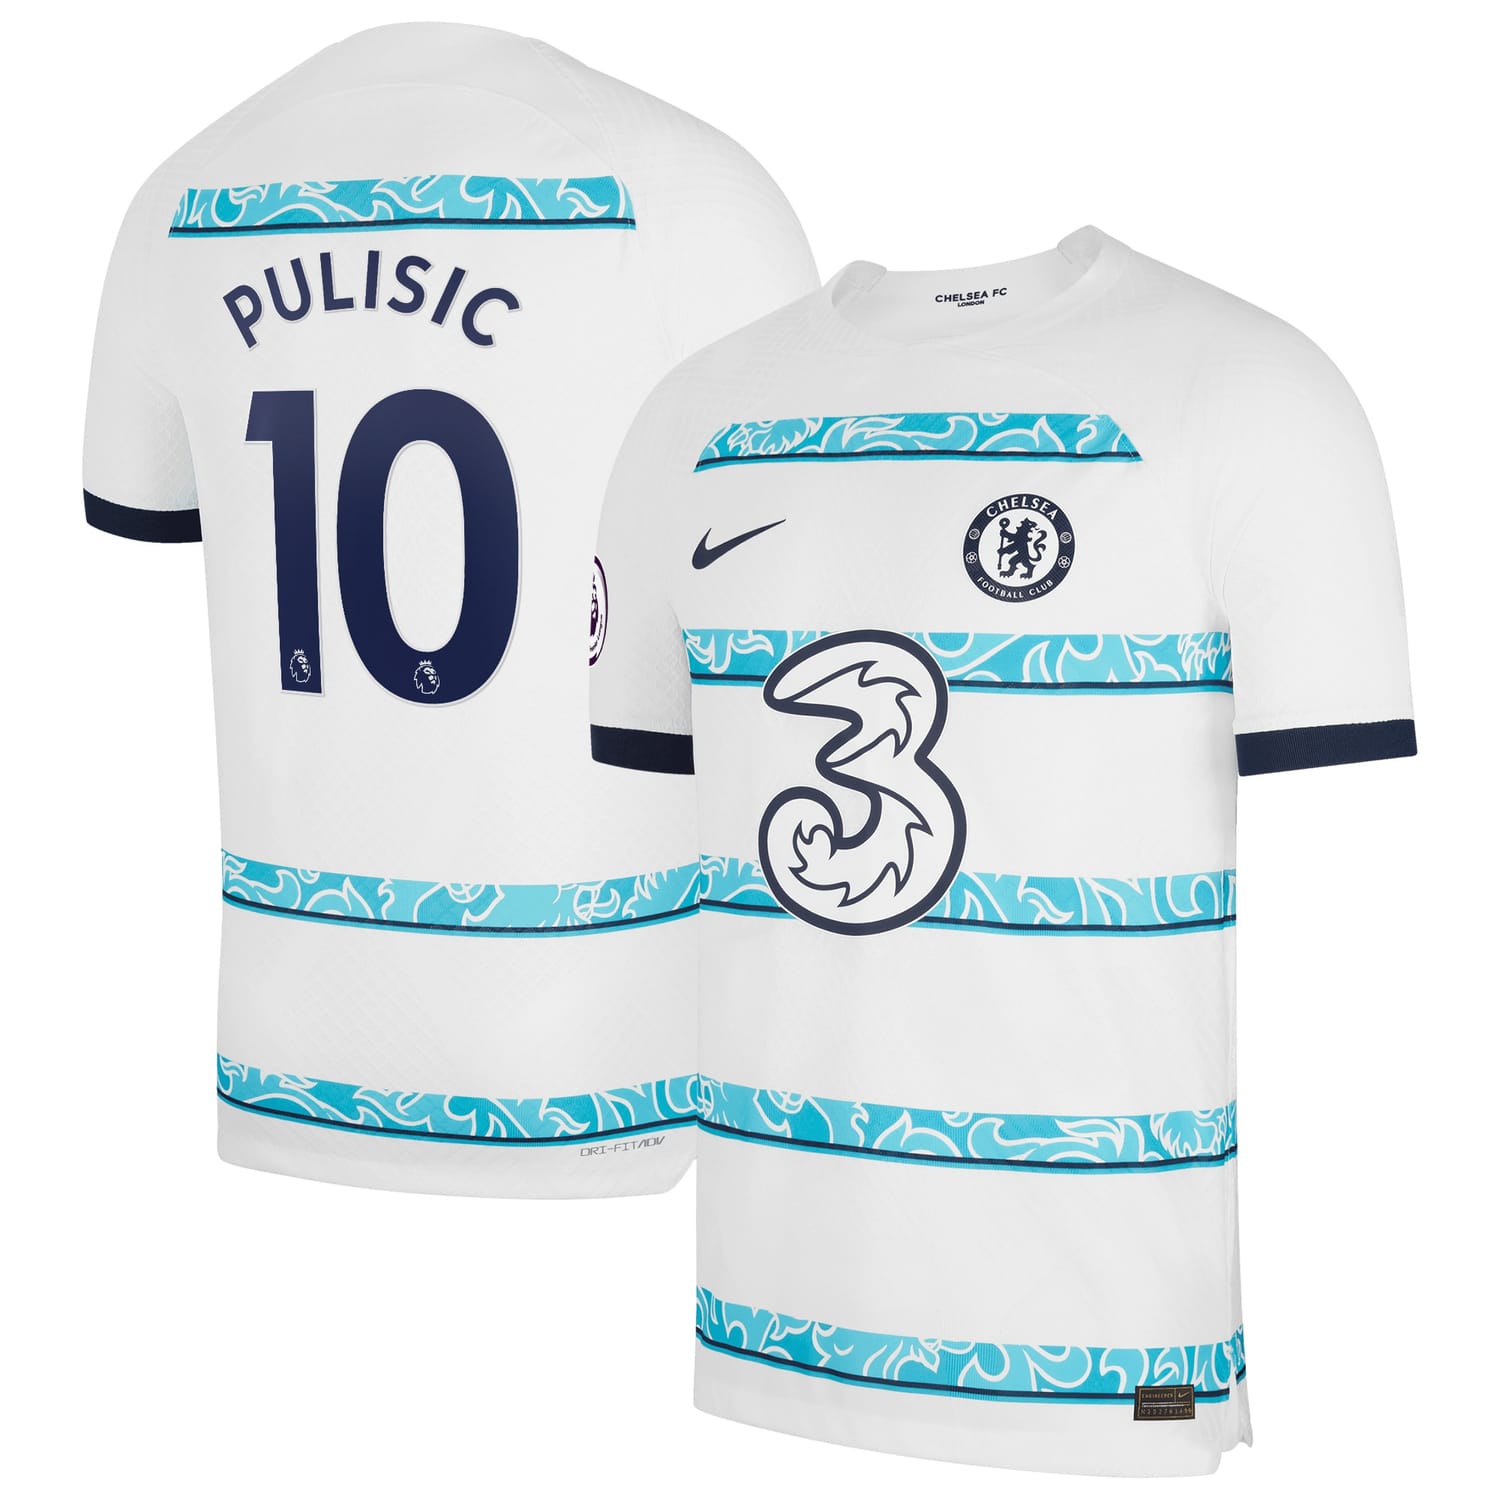 Premier League Chelsea Away Authentic Jersey Shirt White 2022-23 player Christian Pulisic printing for Men